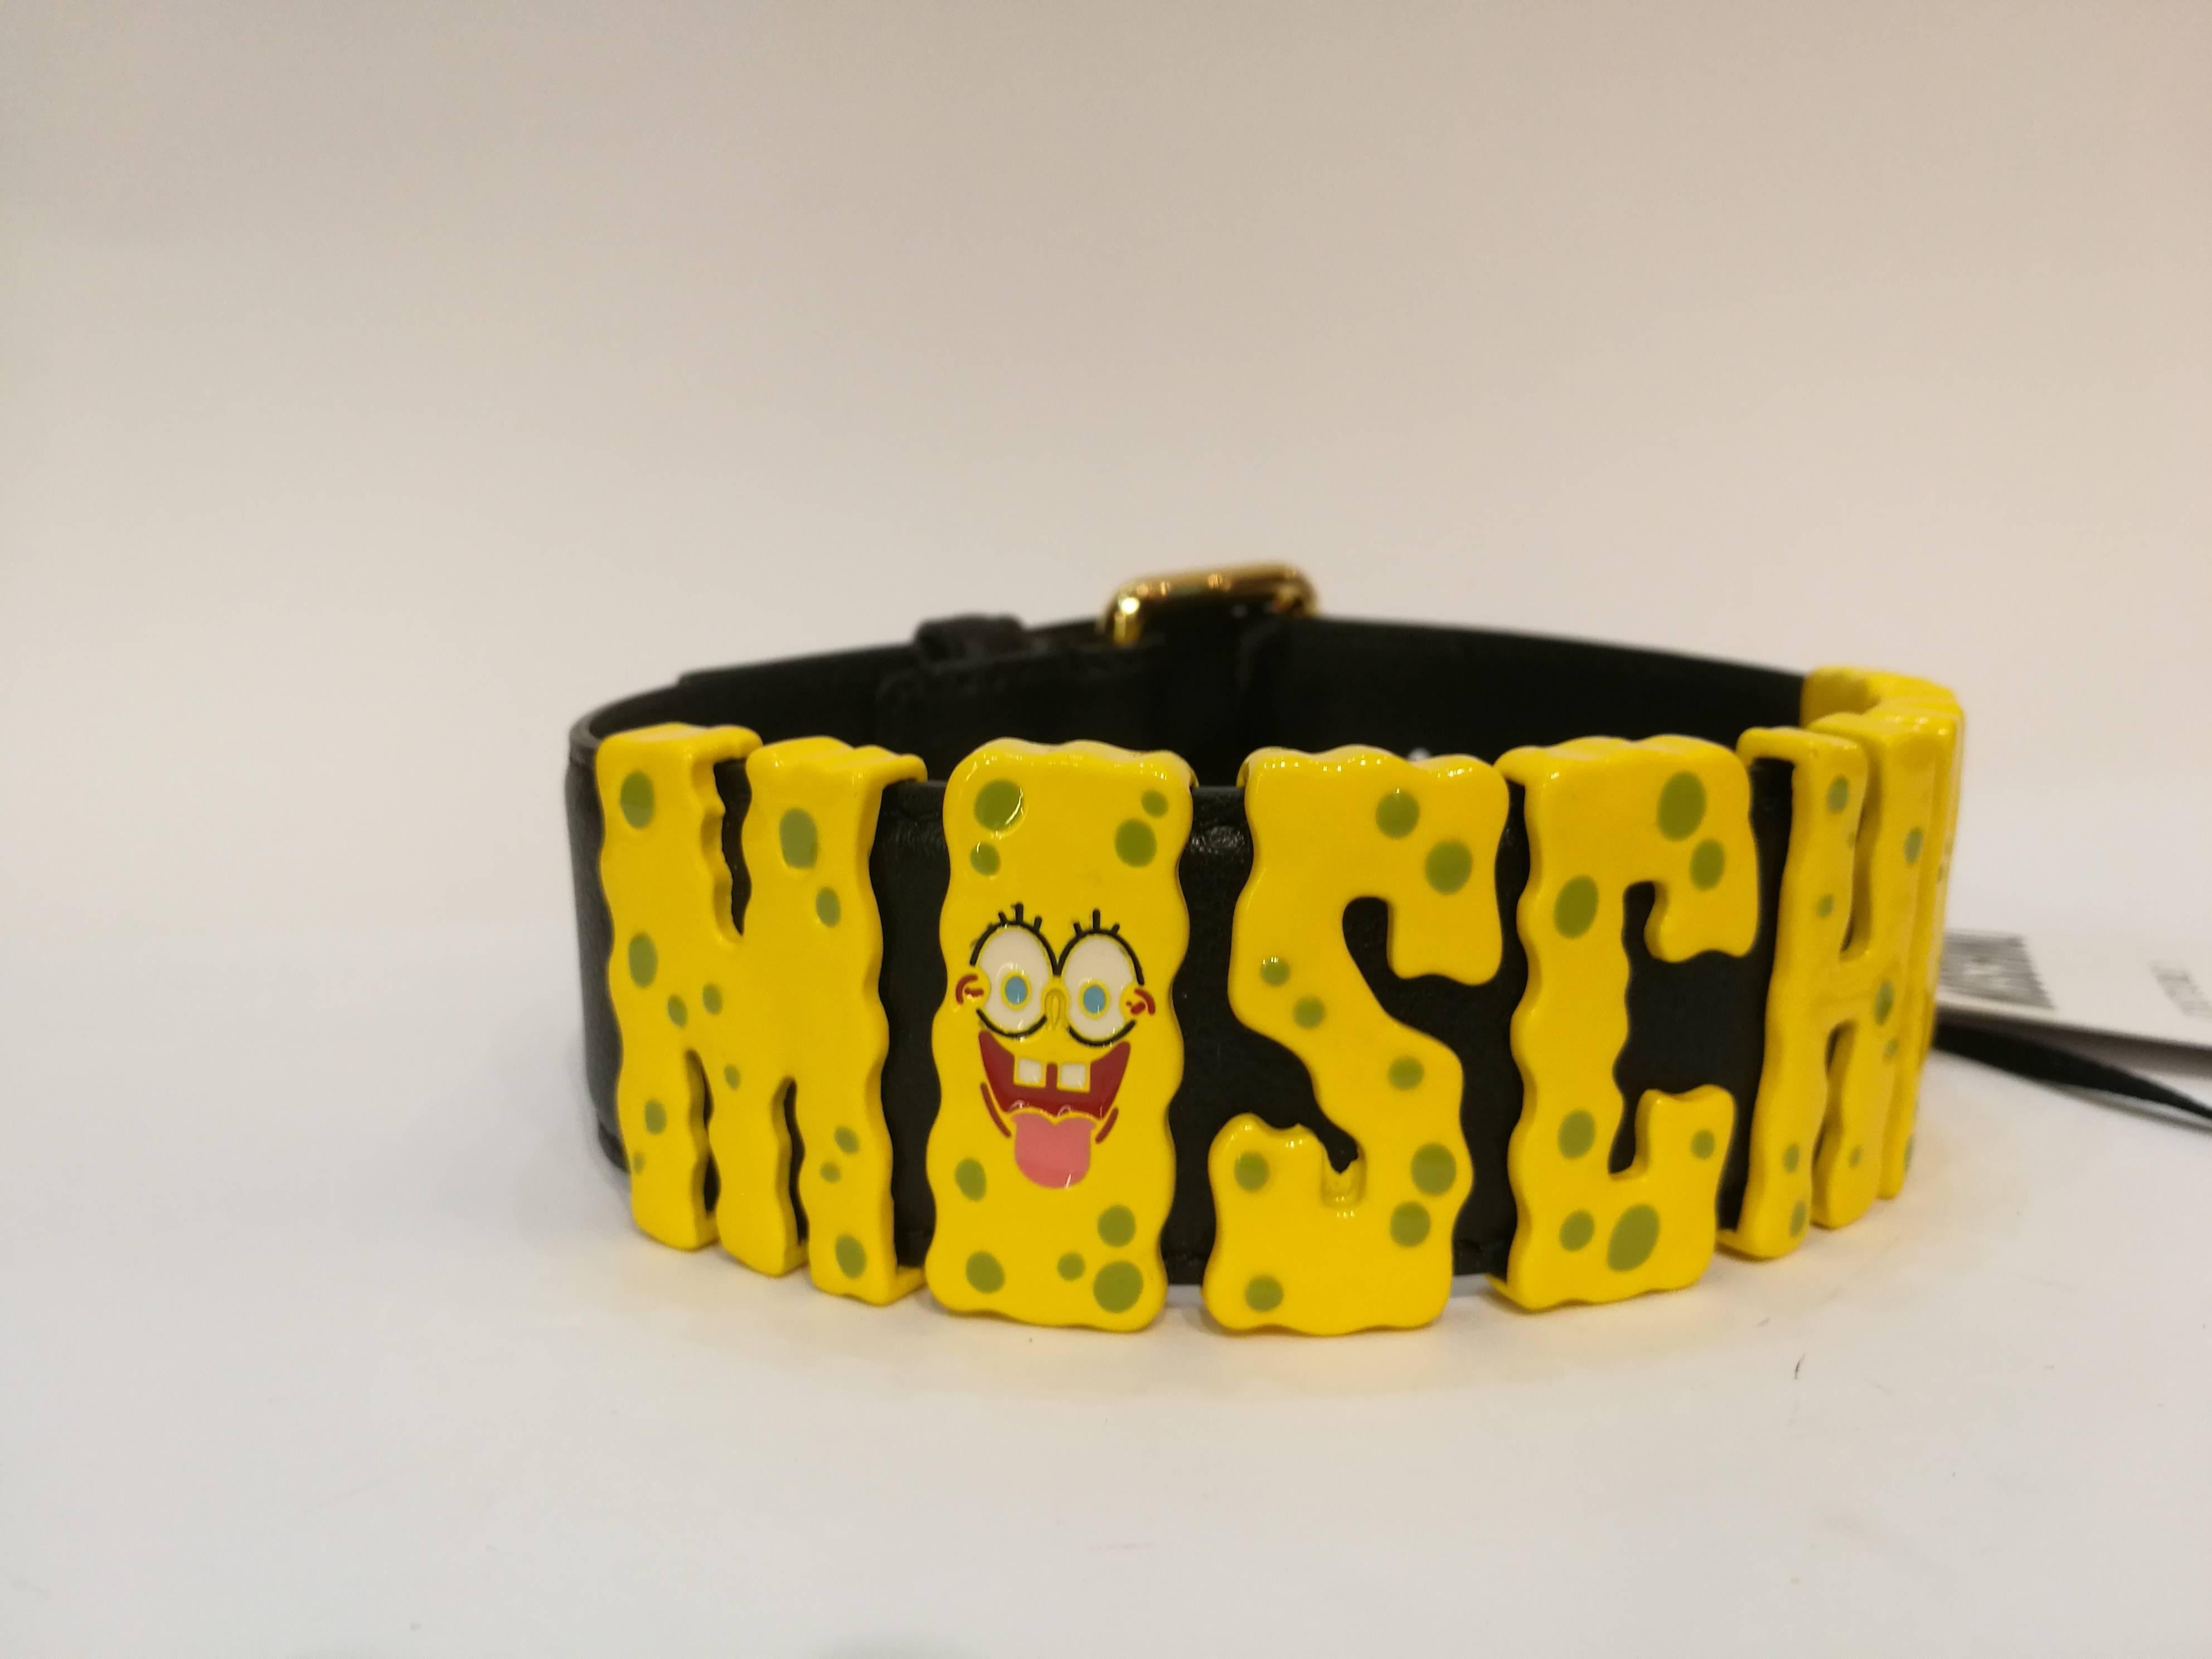 Black calf leather chocker  from Moschino featuring yellow SpongeBob logo plaque at the front and a stud fastening.
Made in Italy